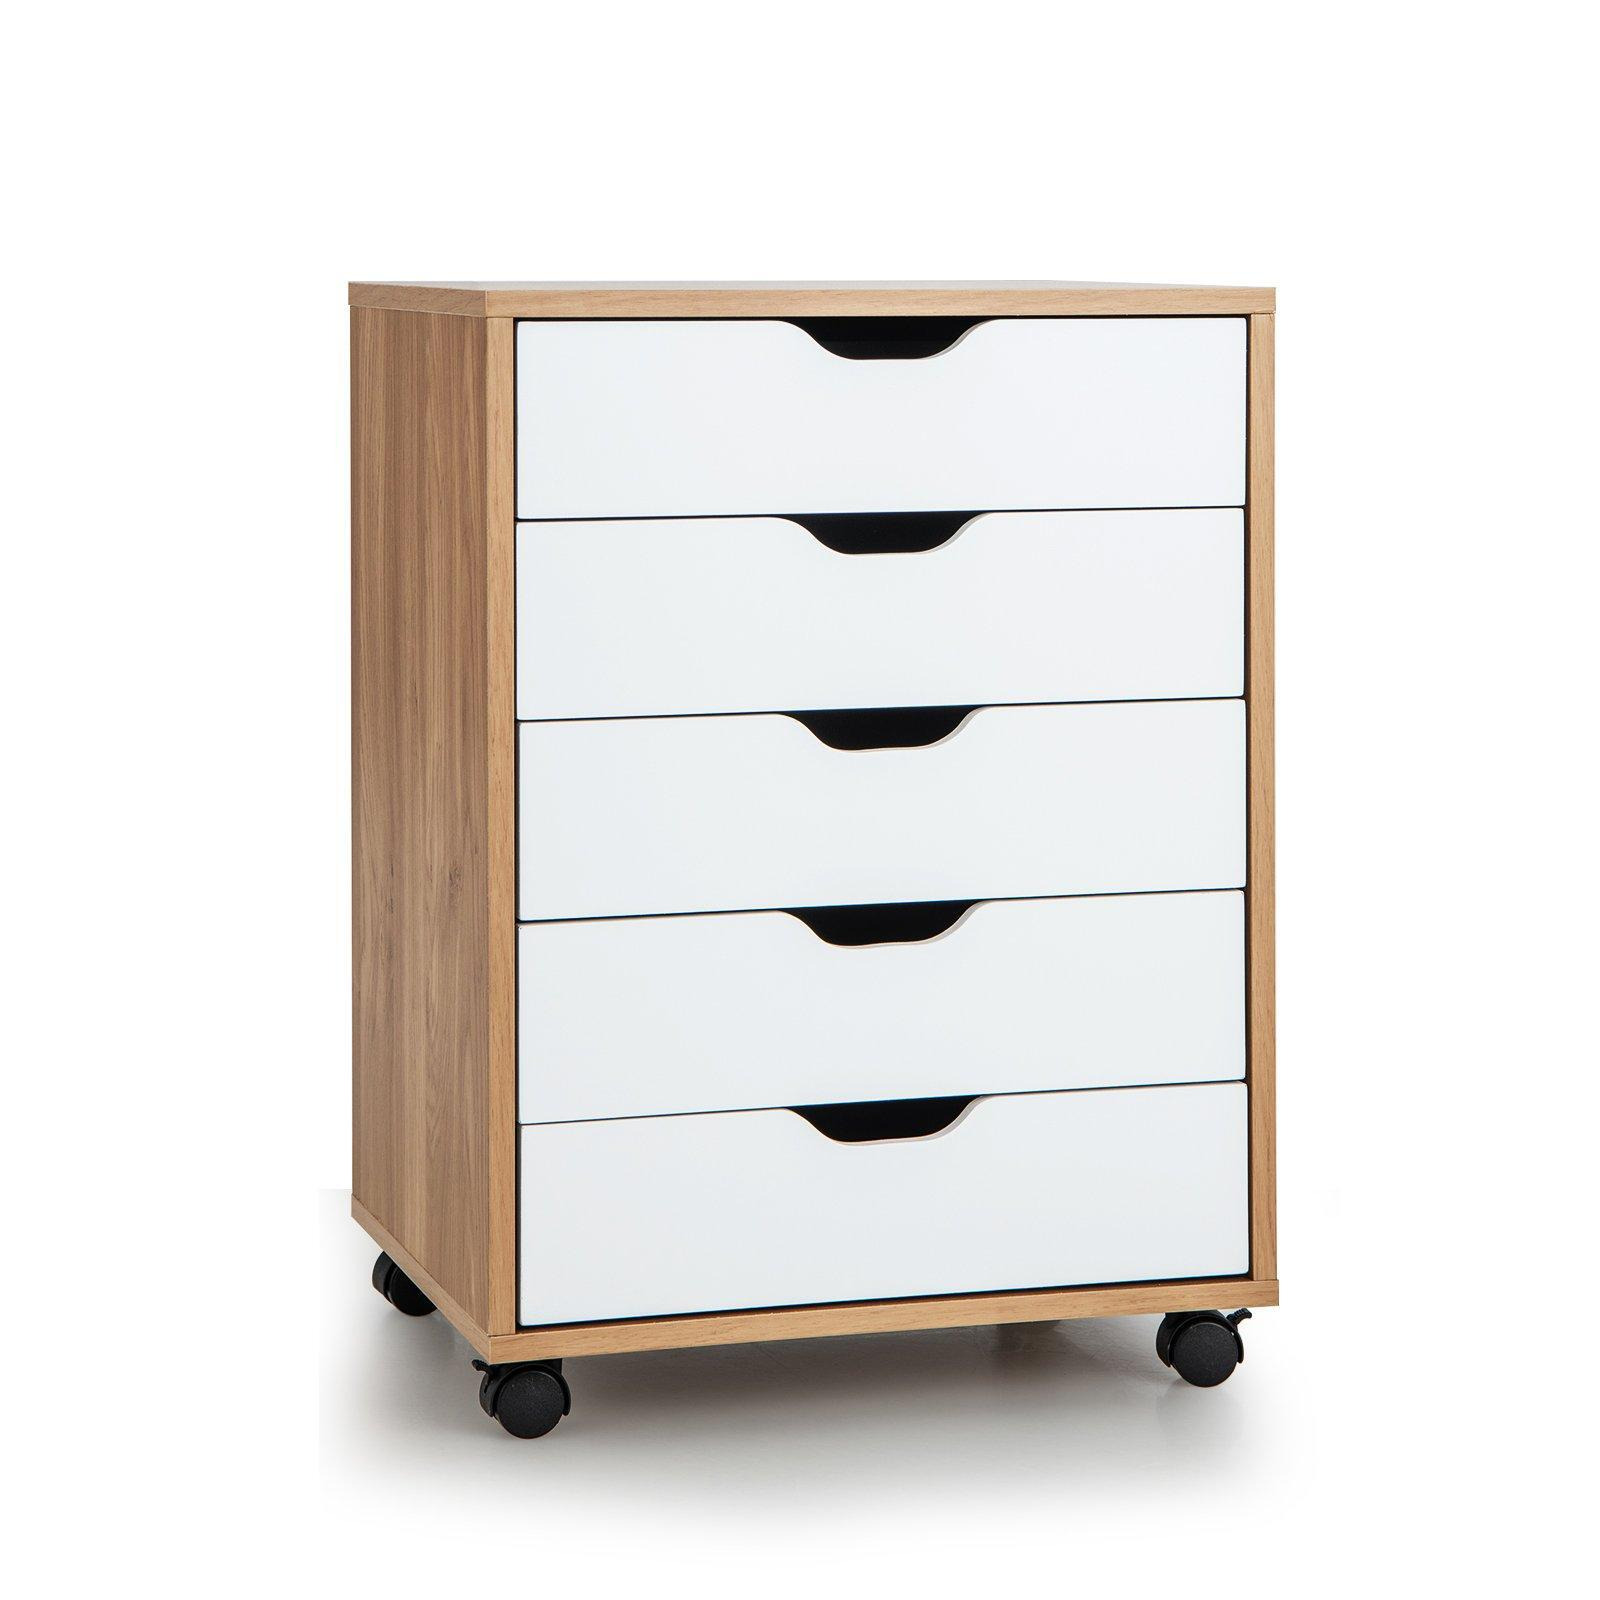 5 Drawer Rolling Storage Cabinet Mobile Chest of Drawers Wooden Dresser Organizer Coffee - image 1